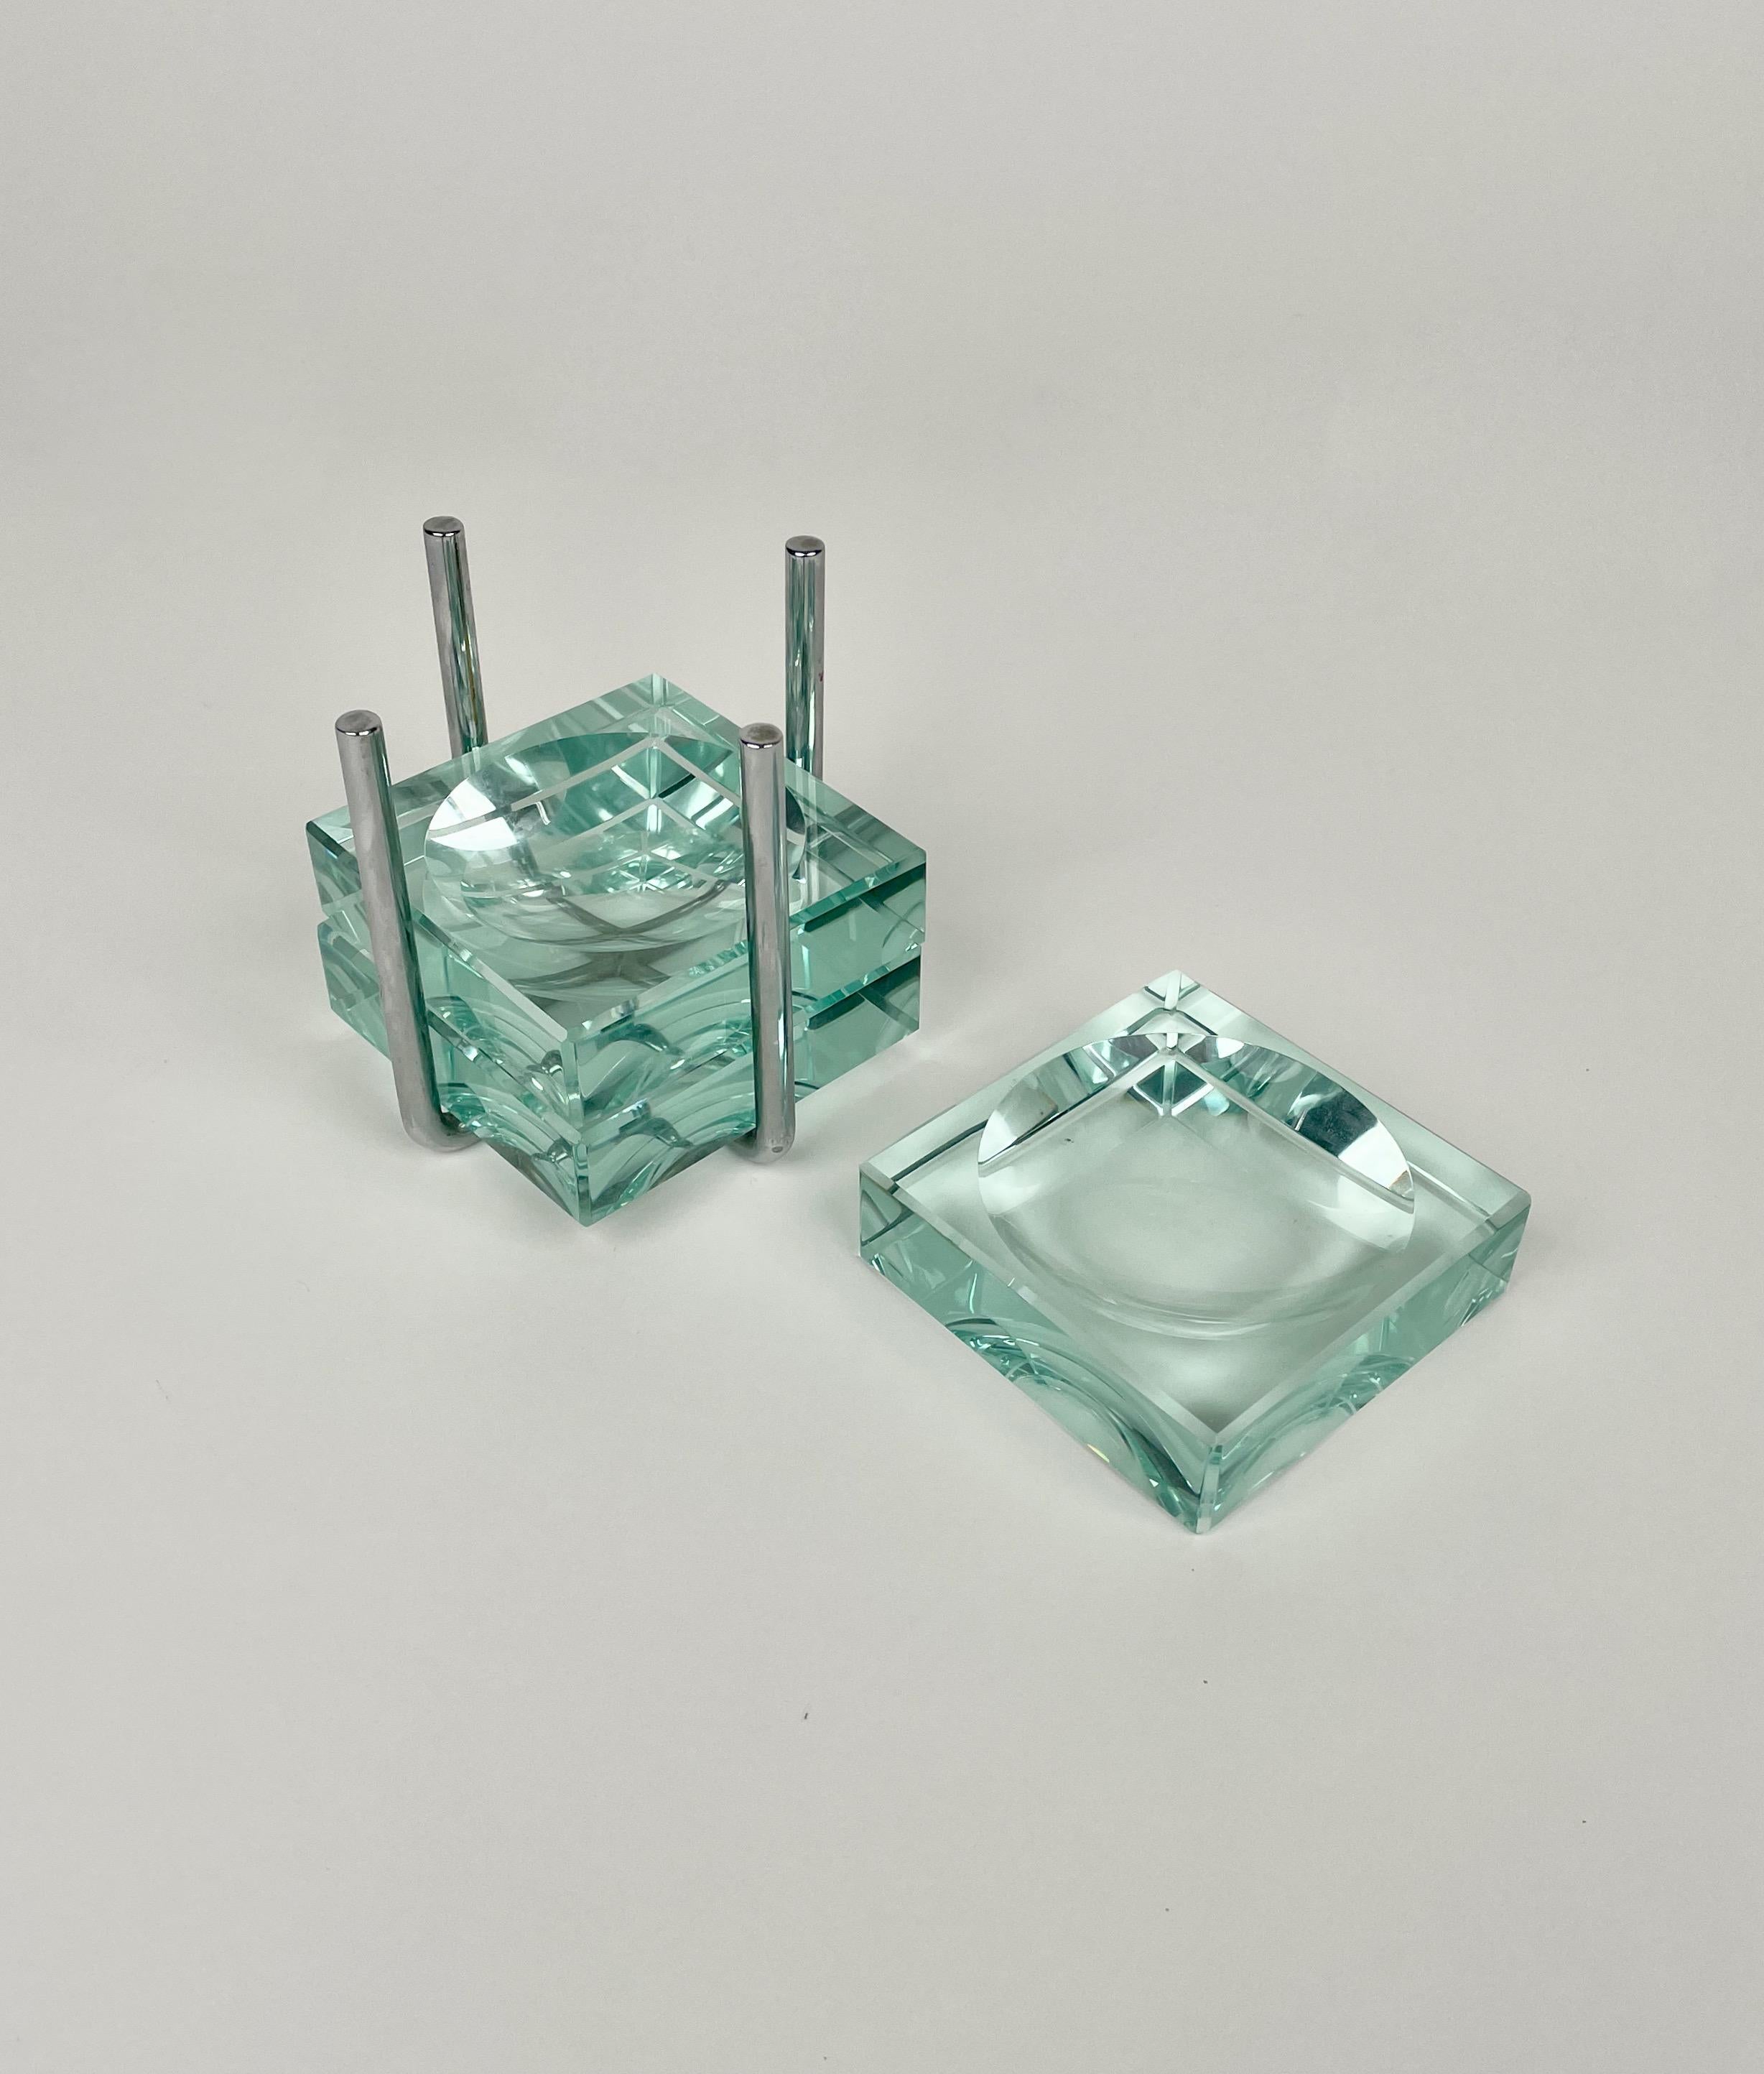 Set of three ashtrays in aquamarine glass coming with their steel holding structure. Designed by Gallotti & Radice in the 1970s, Italy.